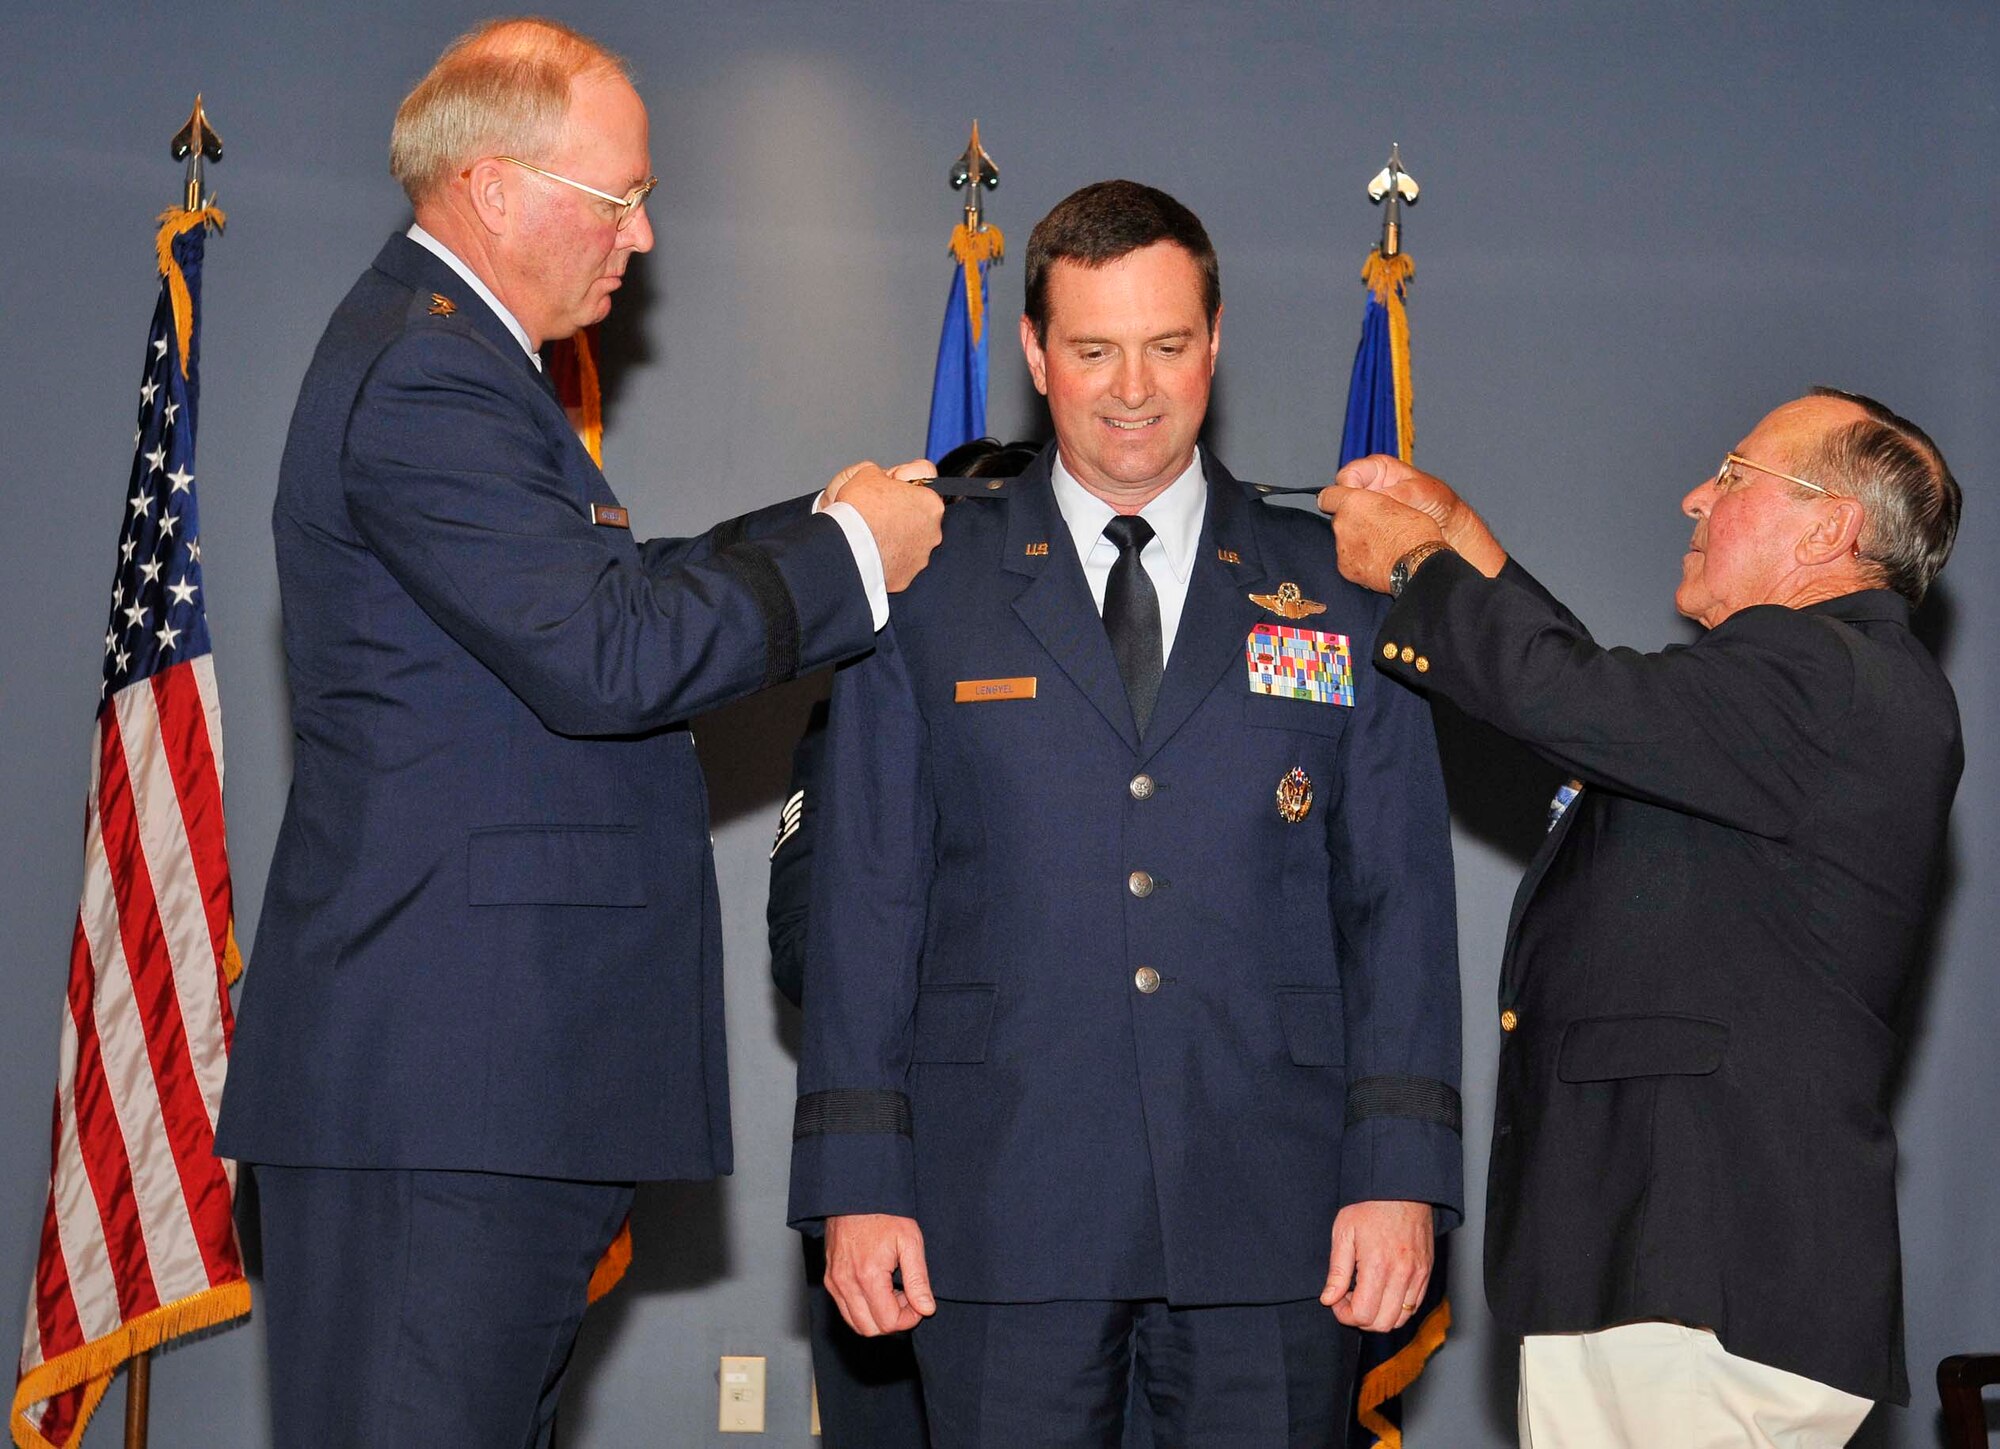 Gen. Craig McKinley, National Guard Bureau chief, and retired Air Force Lt. Col. Lauren Lengyel pin on Maj. Gen. Joseph Lengyel’s second star during his promotion ceremony at Tyndall Air Force Base, Fla., April 1. General Lengyel is the 1st Air Force (Air Forces Northern) vice commander. (U.S. Air Force photo by Lisa Norman)